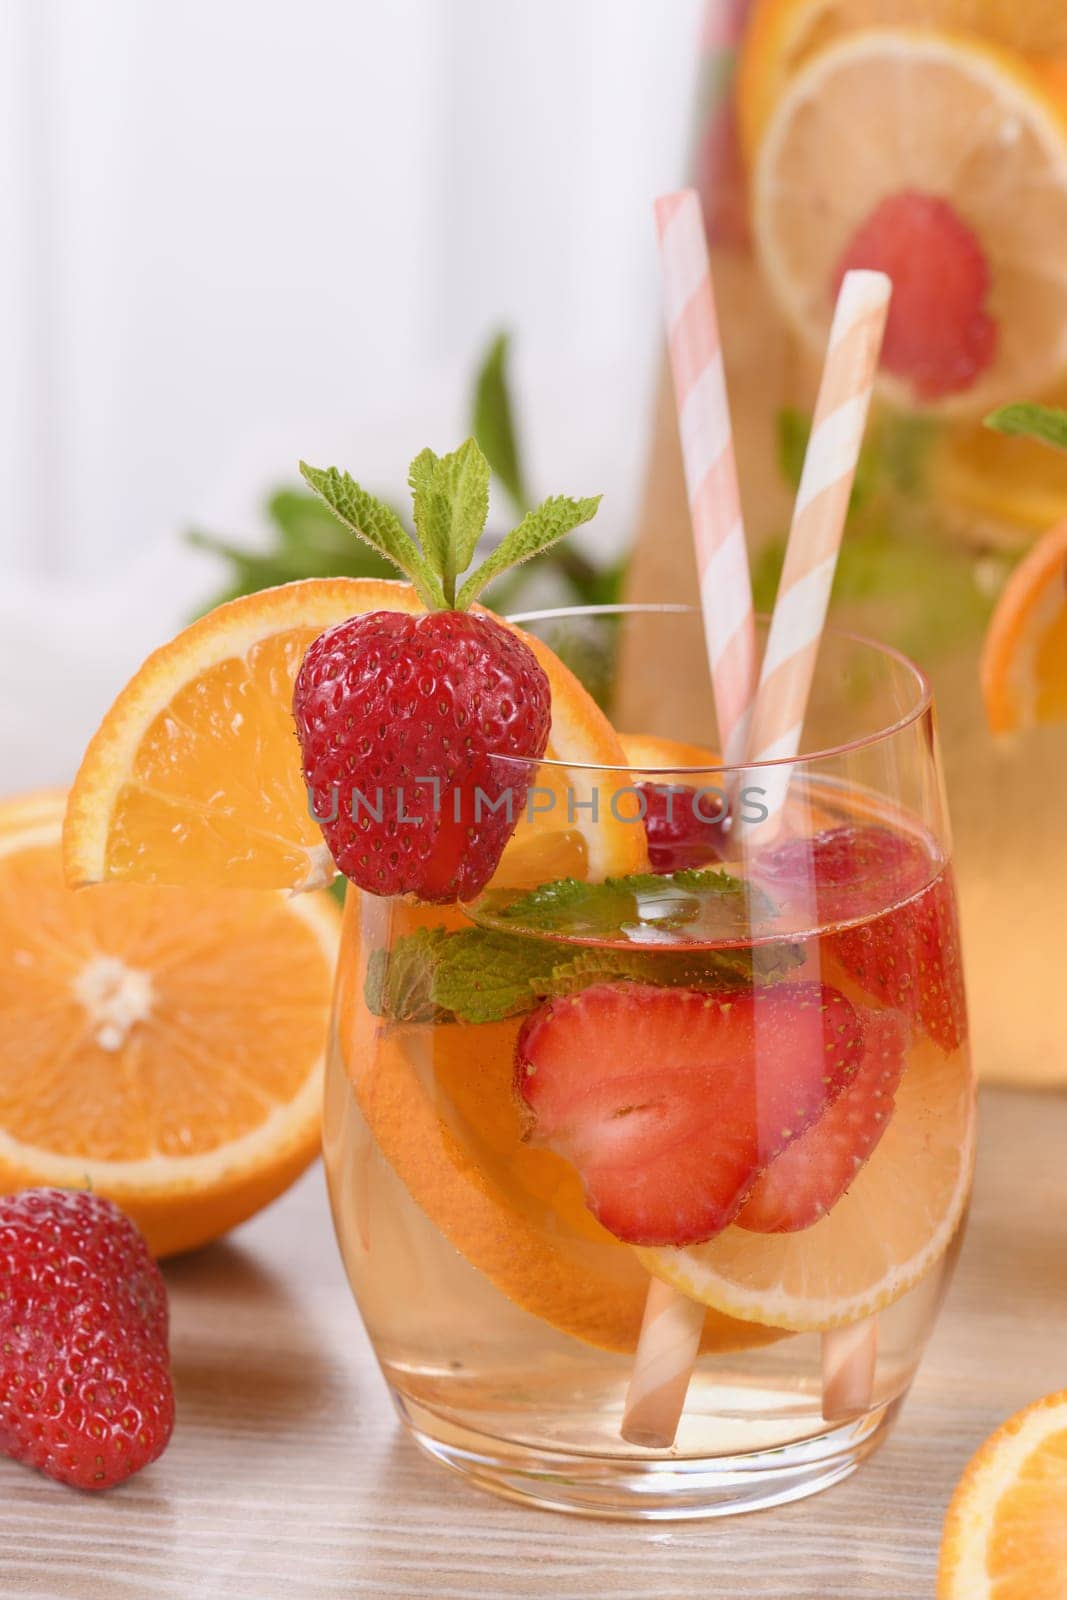 Summer Sangria cocktail or lemonade with strawberry, orange and mint. Refreshing organic non-alcoholic, Detox vitaminized healthy drink, fruit in a glass